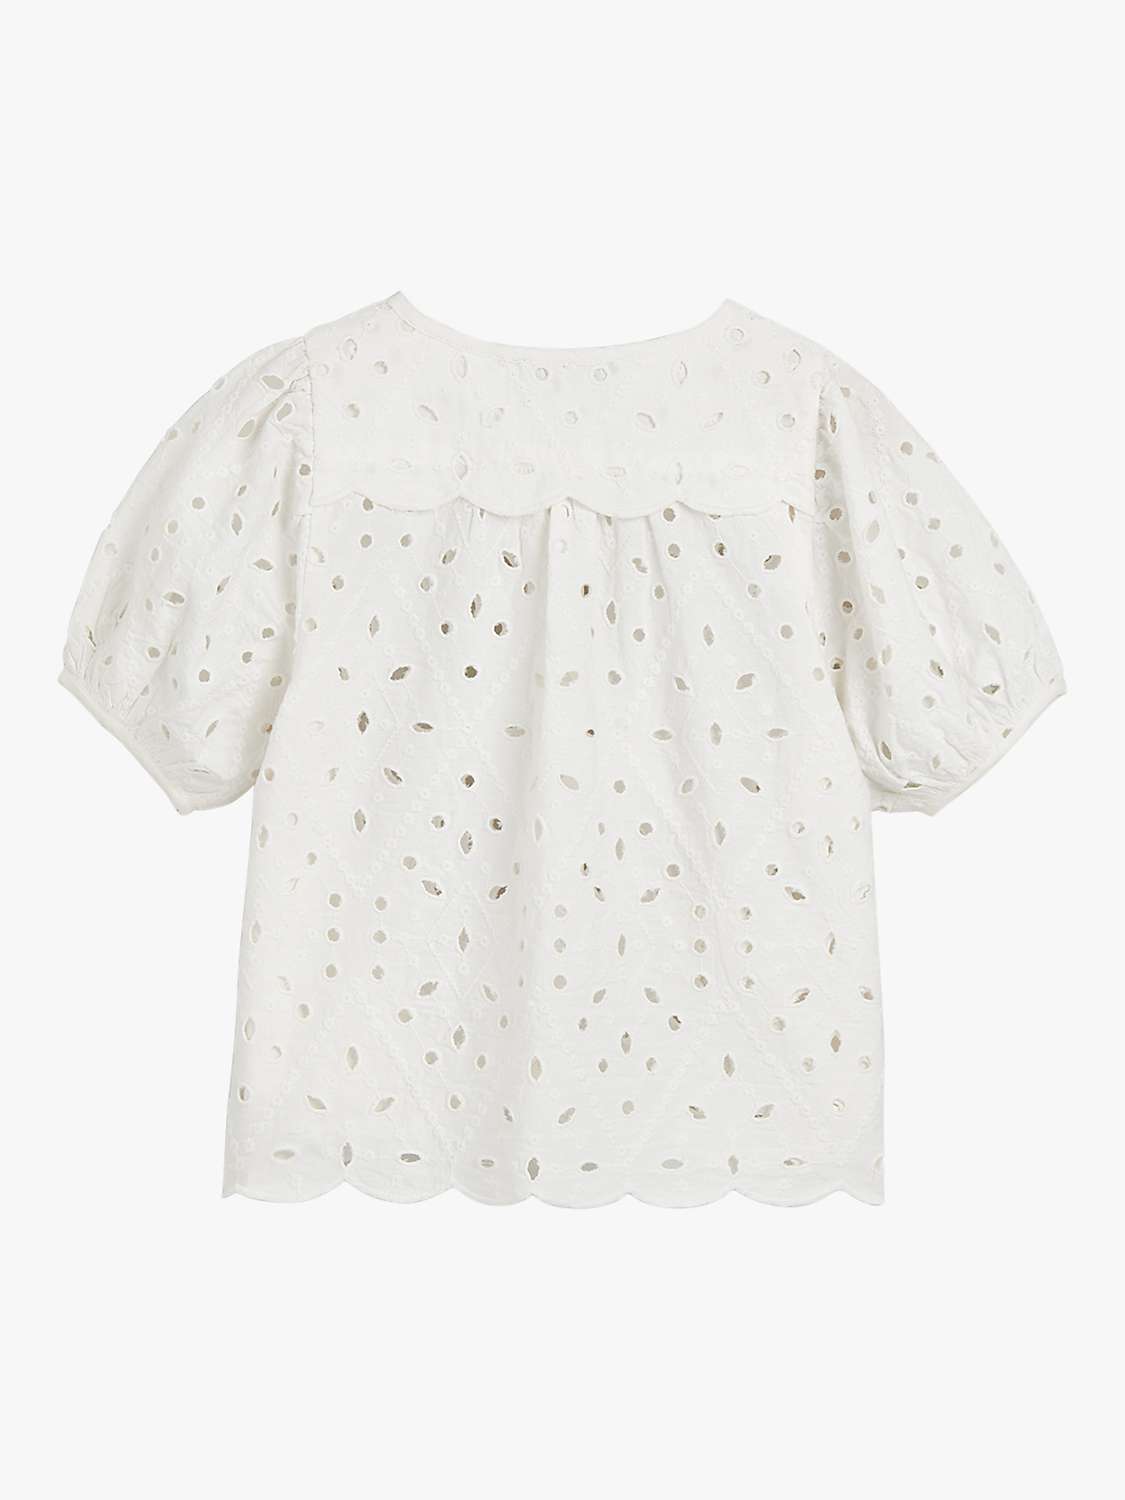 Buy Whistles Kids' Broderie T-Shirt, Ivory Online at johnlewis.com